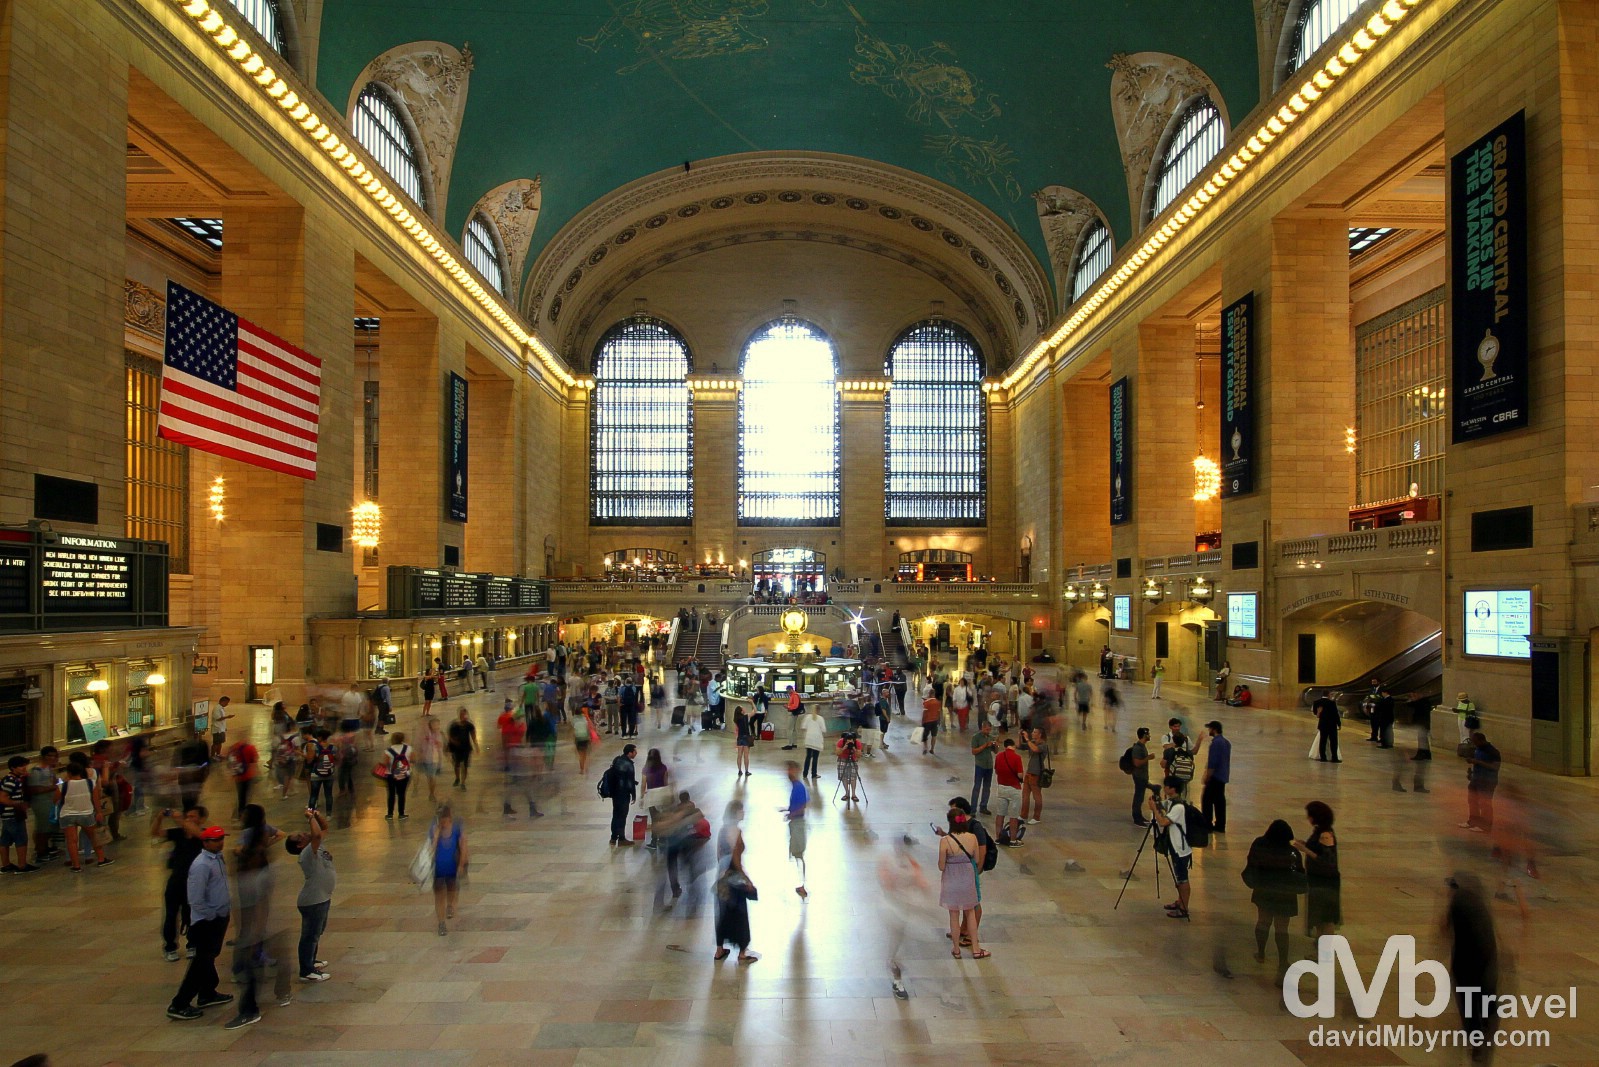 The Main Concourse of Grand Central Station/Terminal, New York City, USA. July 13th 2013.